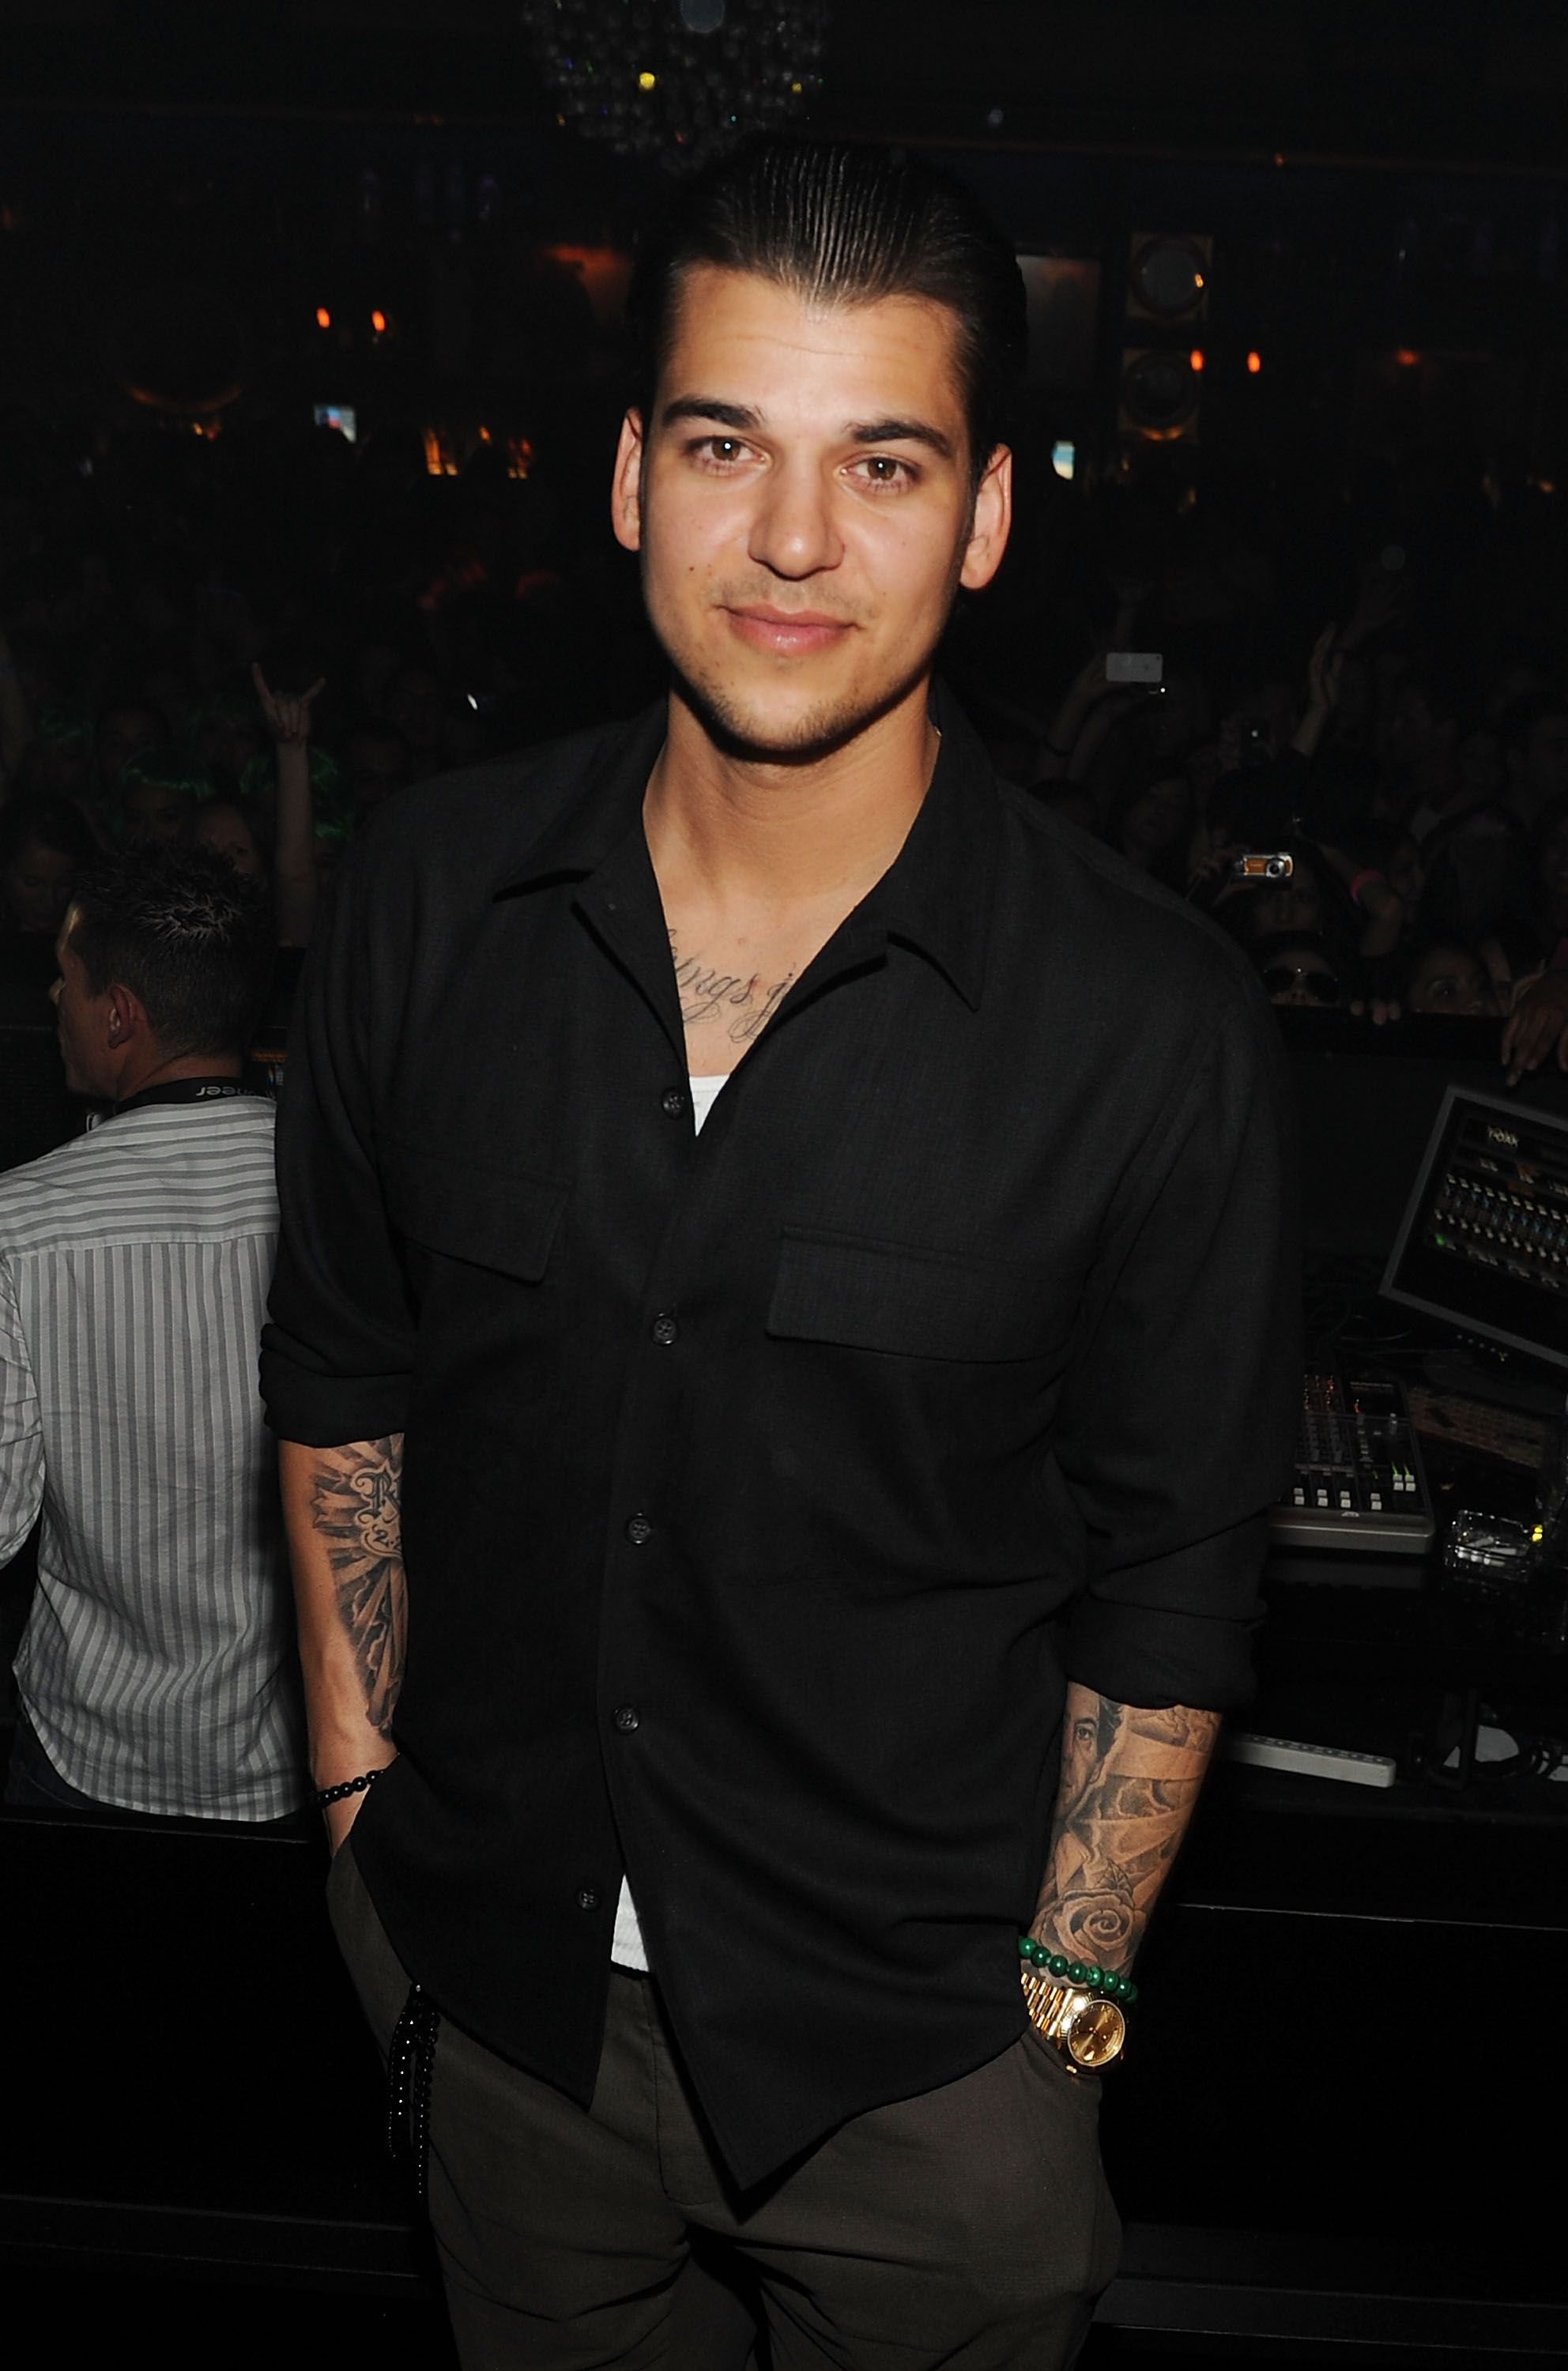 Rob Kardashian during his birthday at 1 Oak on March 16, 2012 in Las Vegas, Nevada. | Source: Getty Images